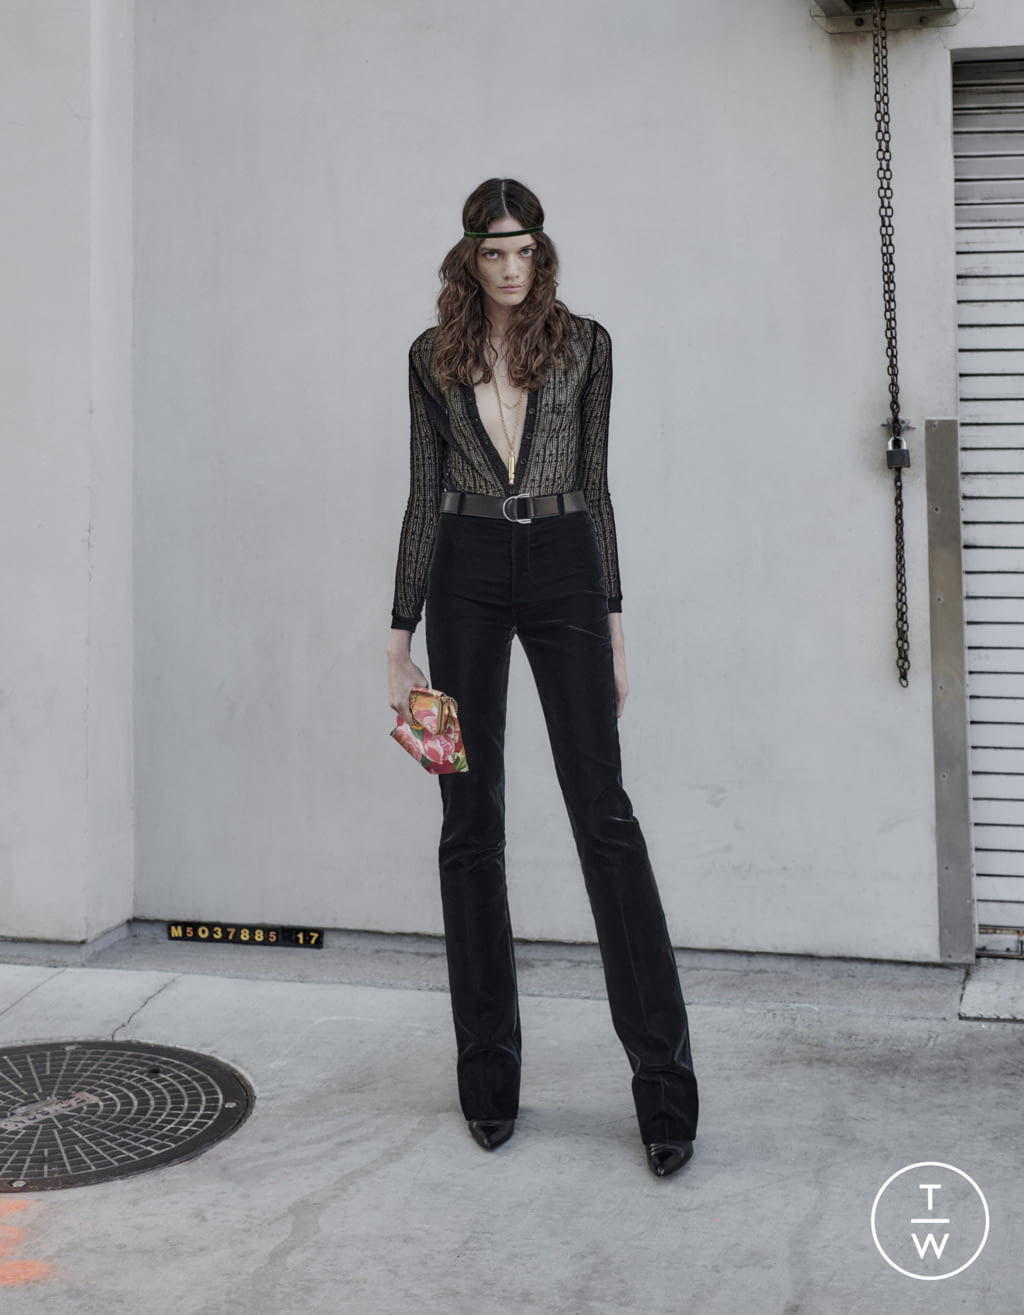 Helmut Lang returns to fashion for a project with YSL